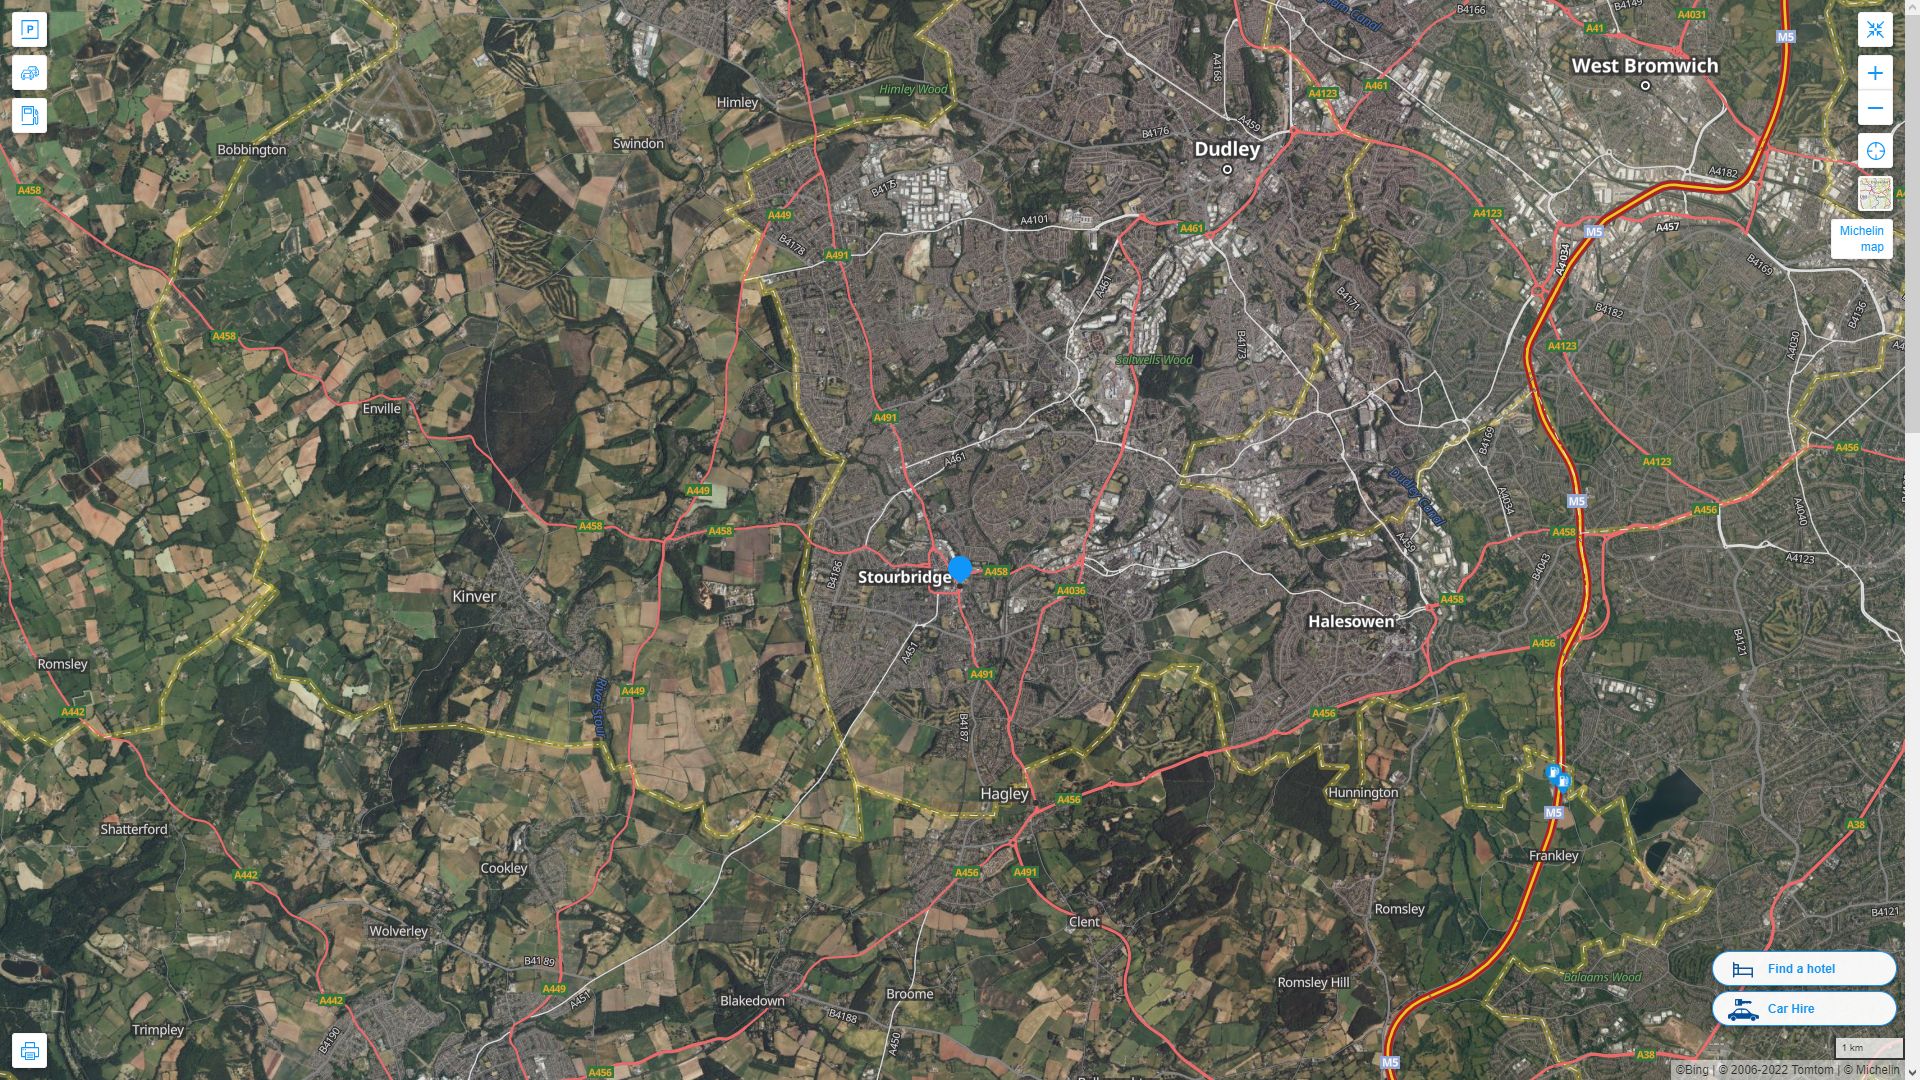 Stourbridge Highway and Road Map with Satellite View